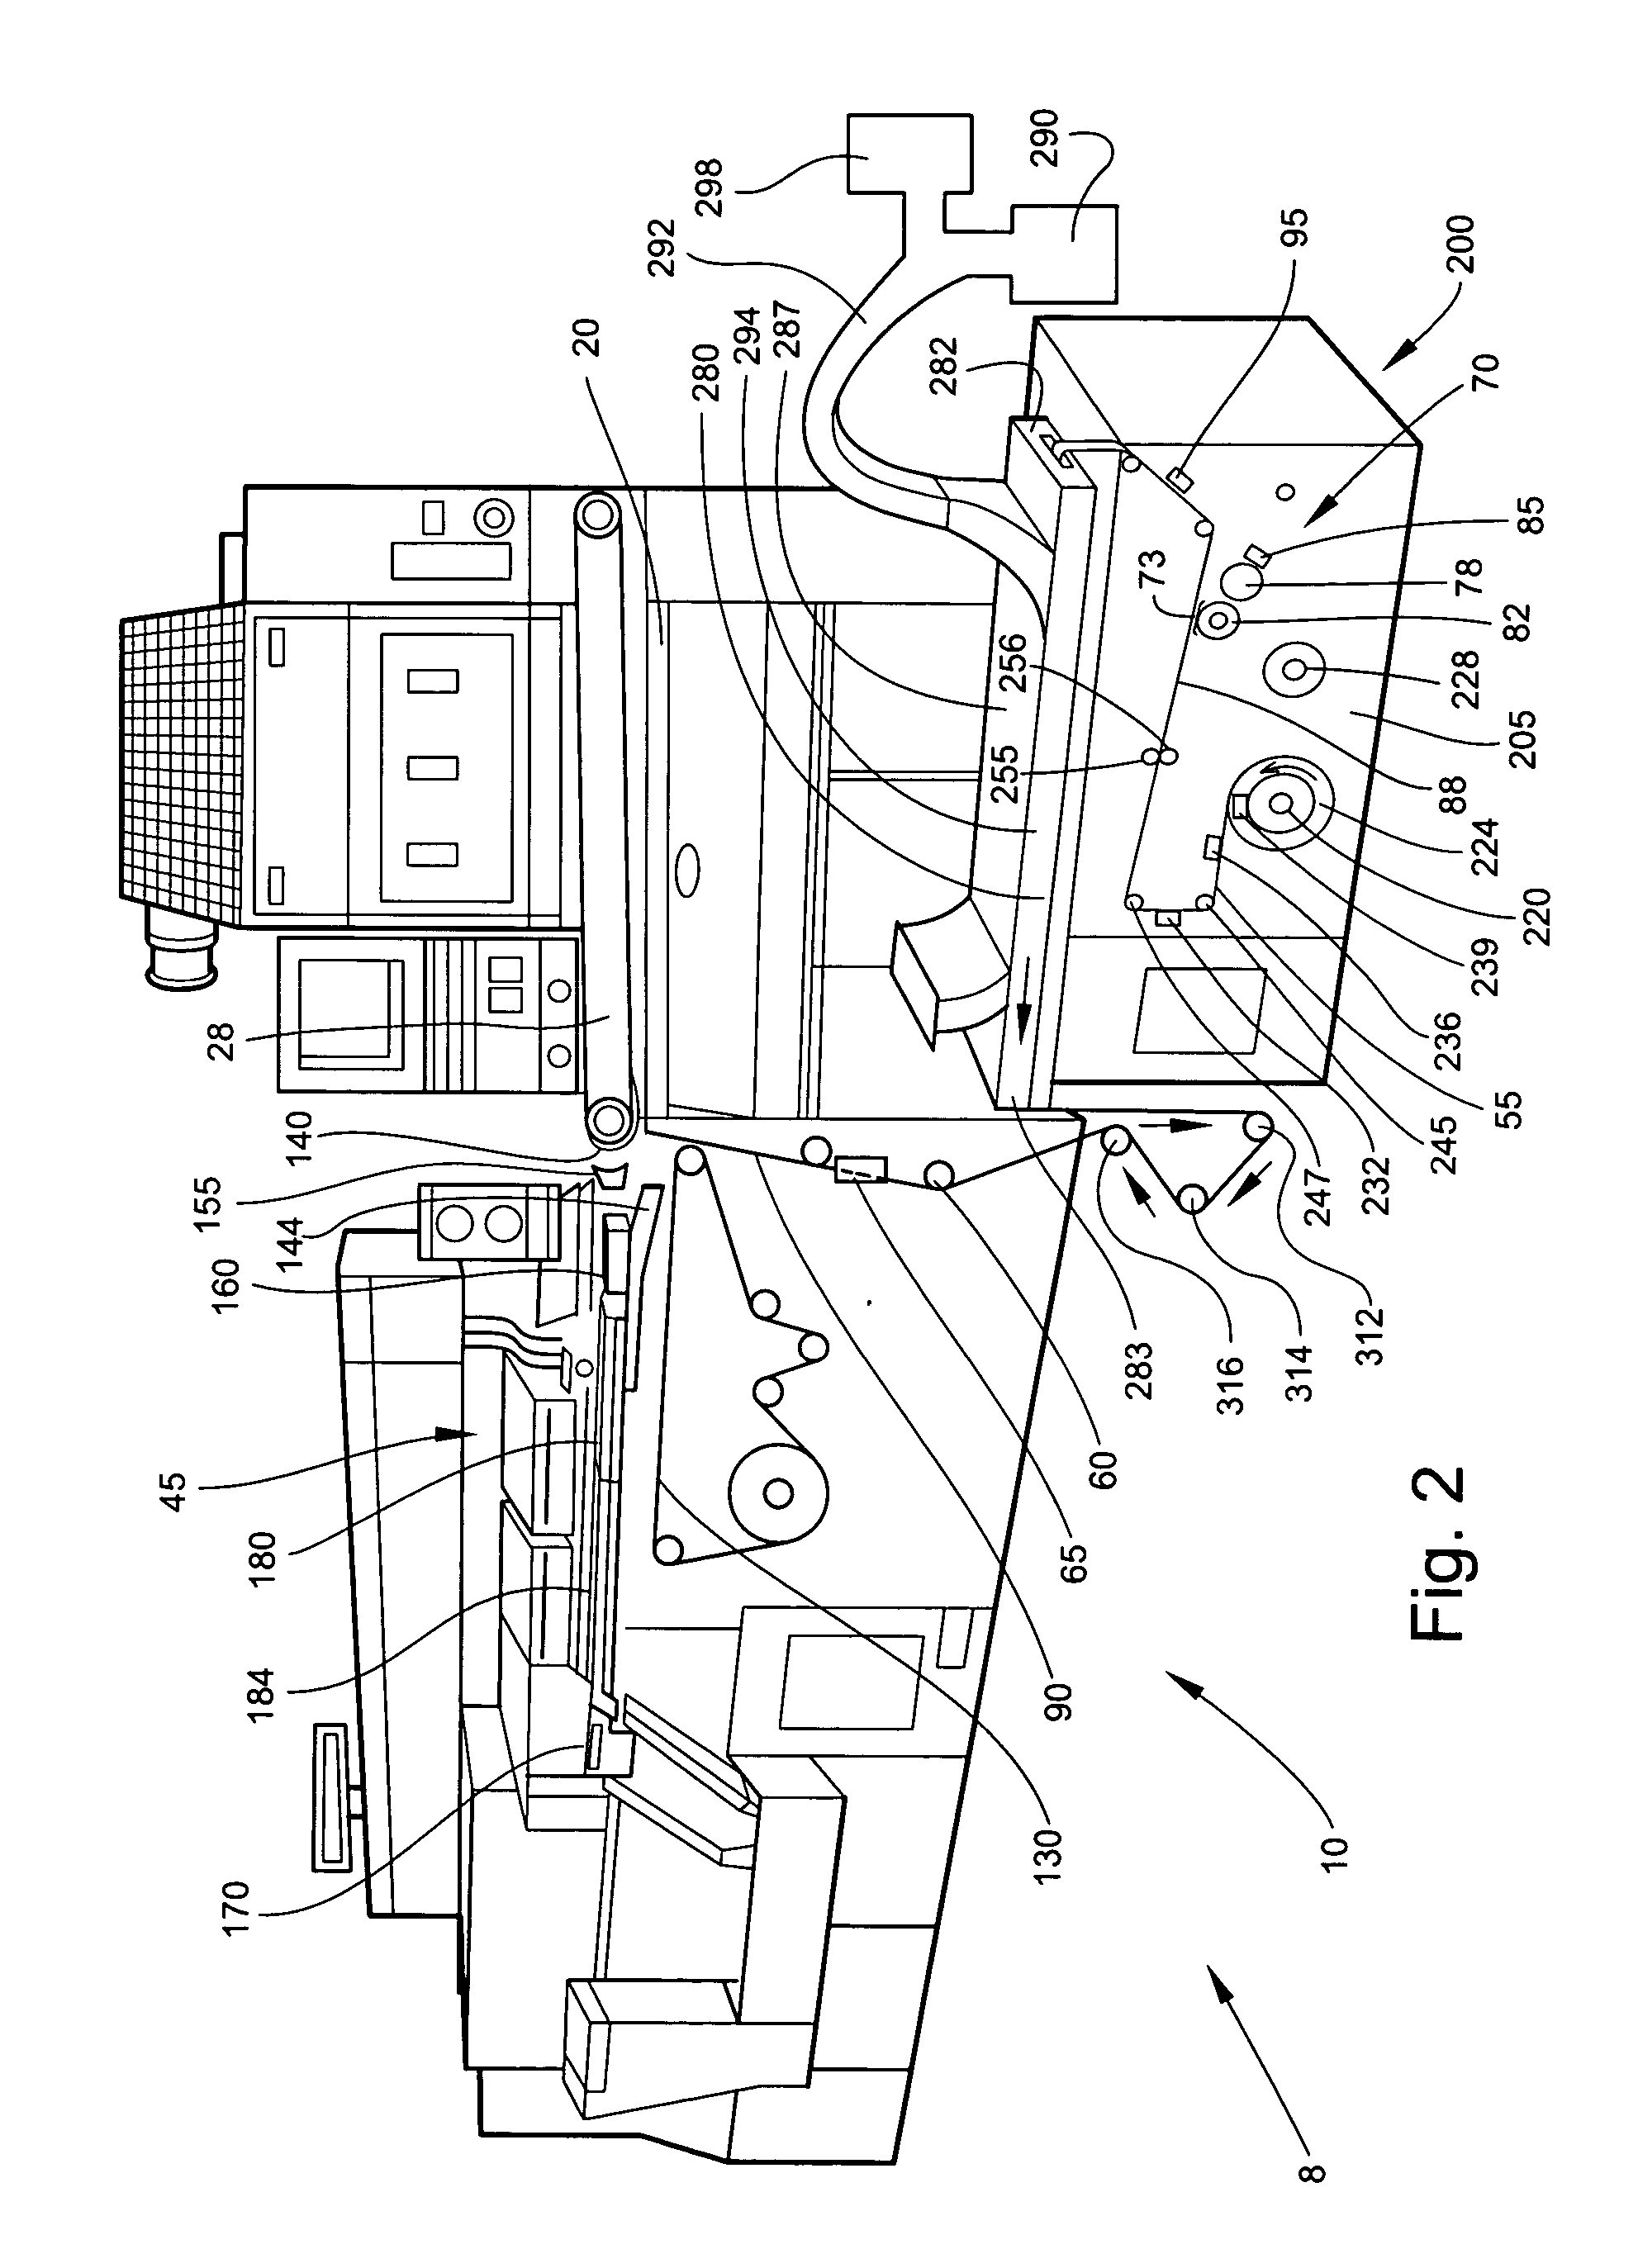 Equipment and methods for manufacturing cigarettes